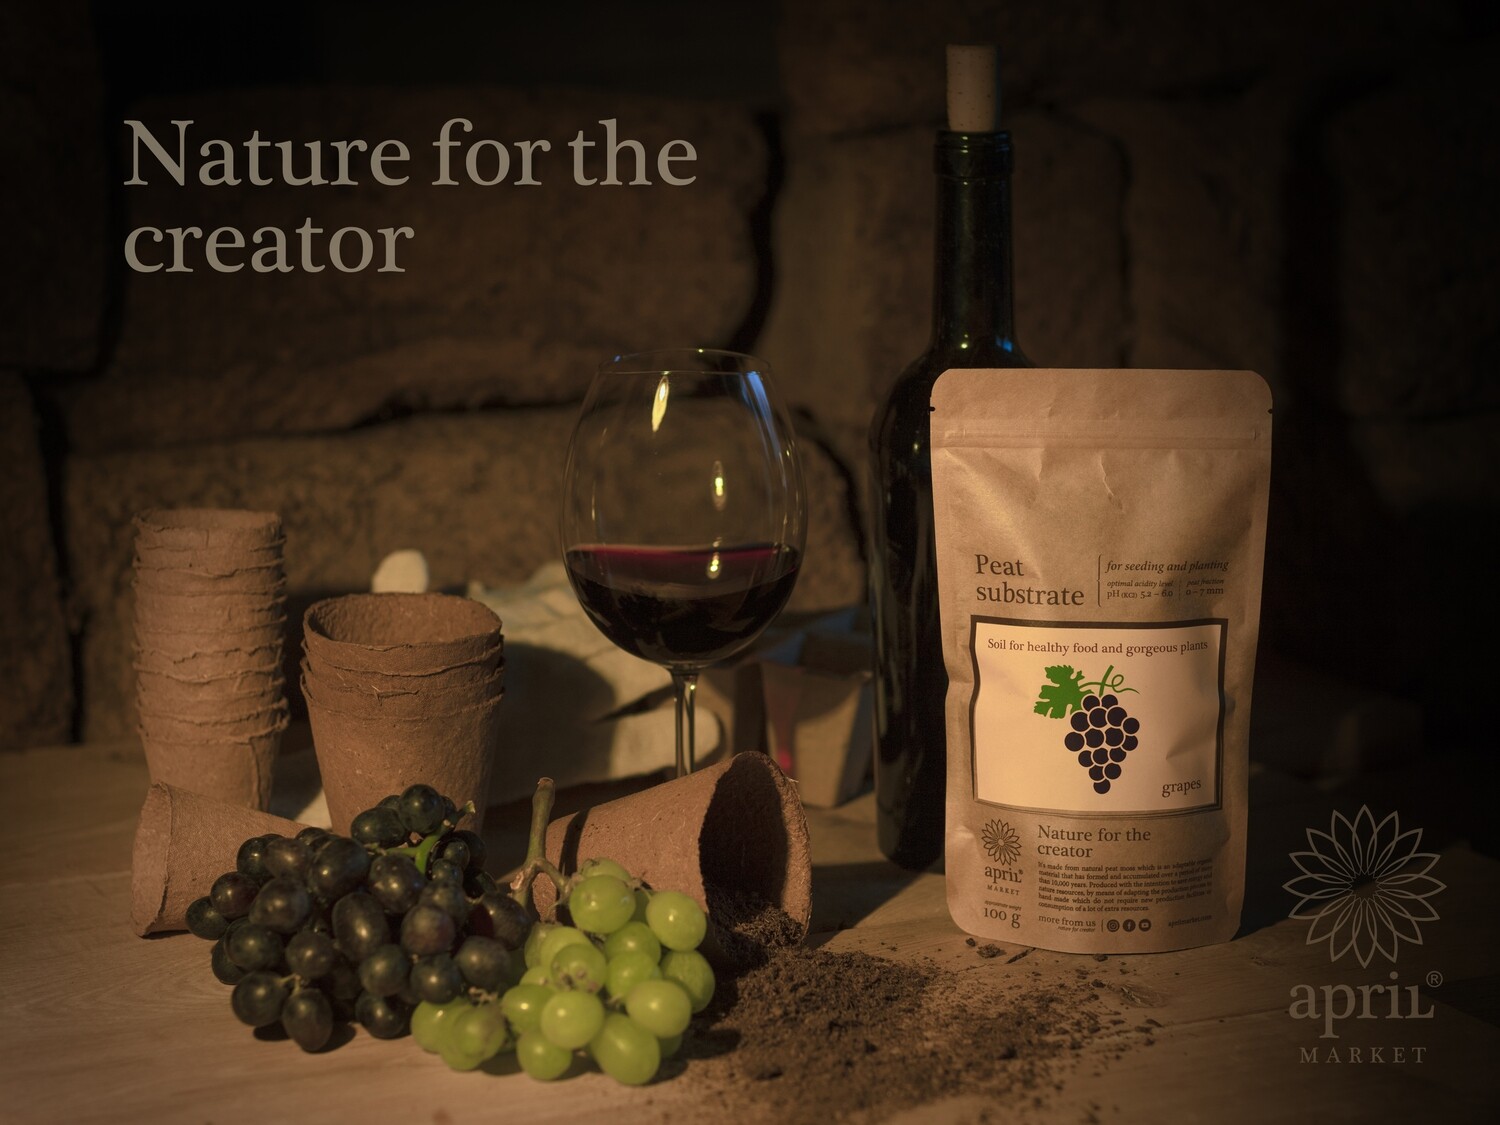 GRAPES / PEAT SUBSTRATE / premium quality soil for seeding and planting grapes / hand made / 100g